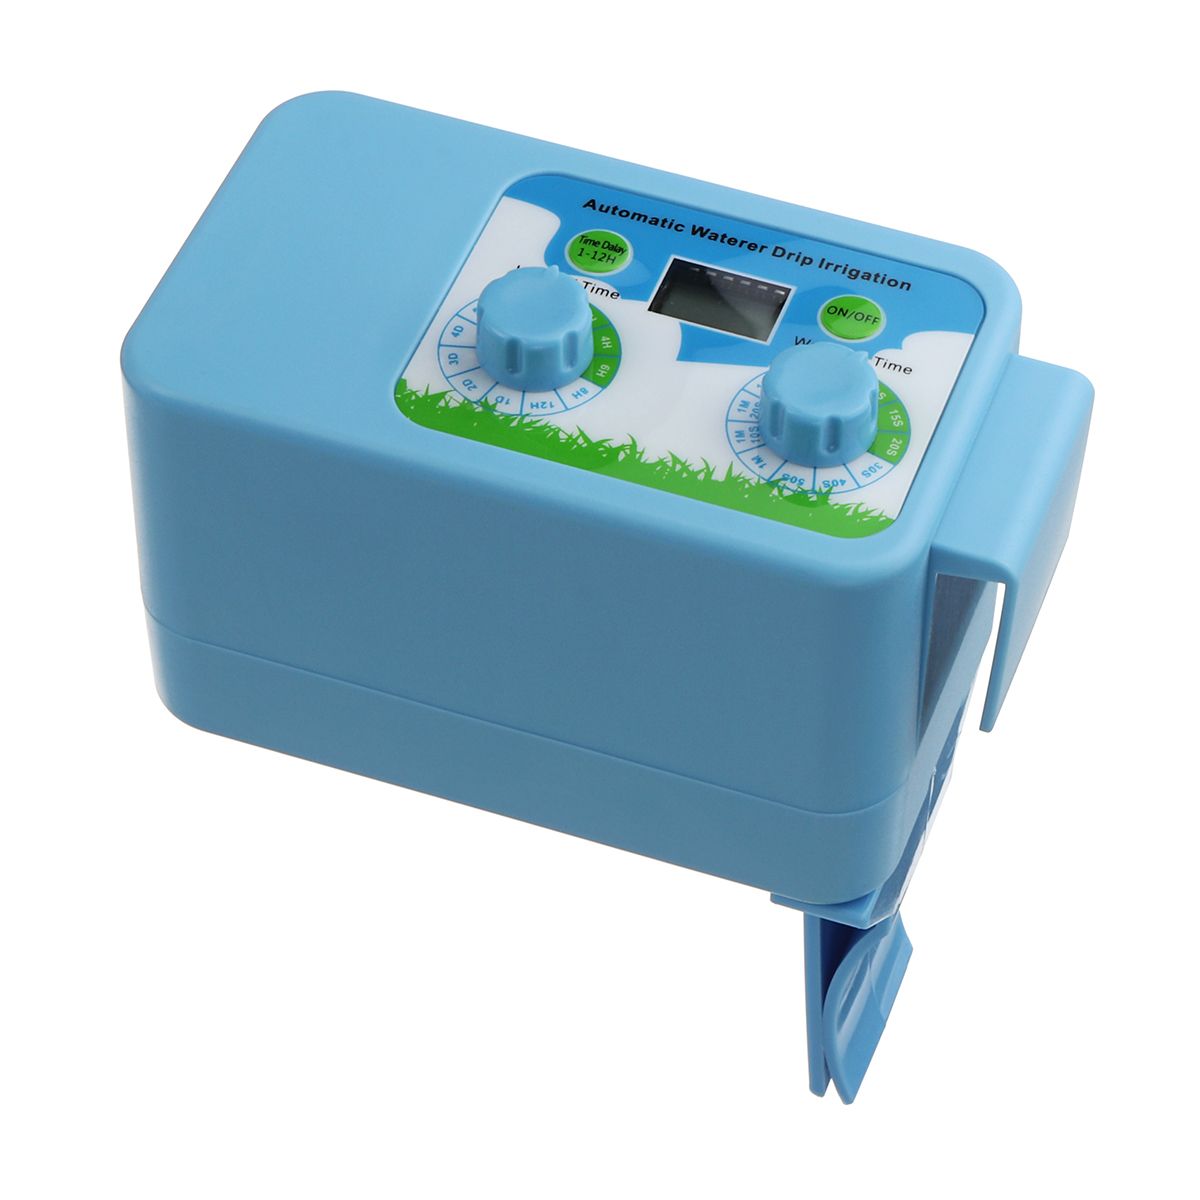 Automatic-Drip-Irrigation-Watering-Timer-System-Interval-Garden-LCD-Controller-1353892